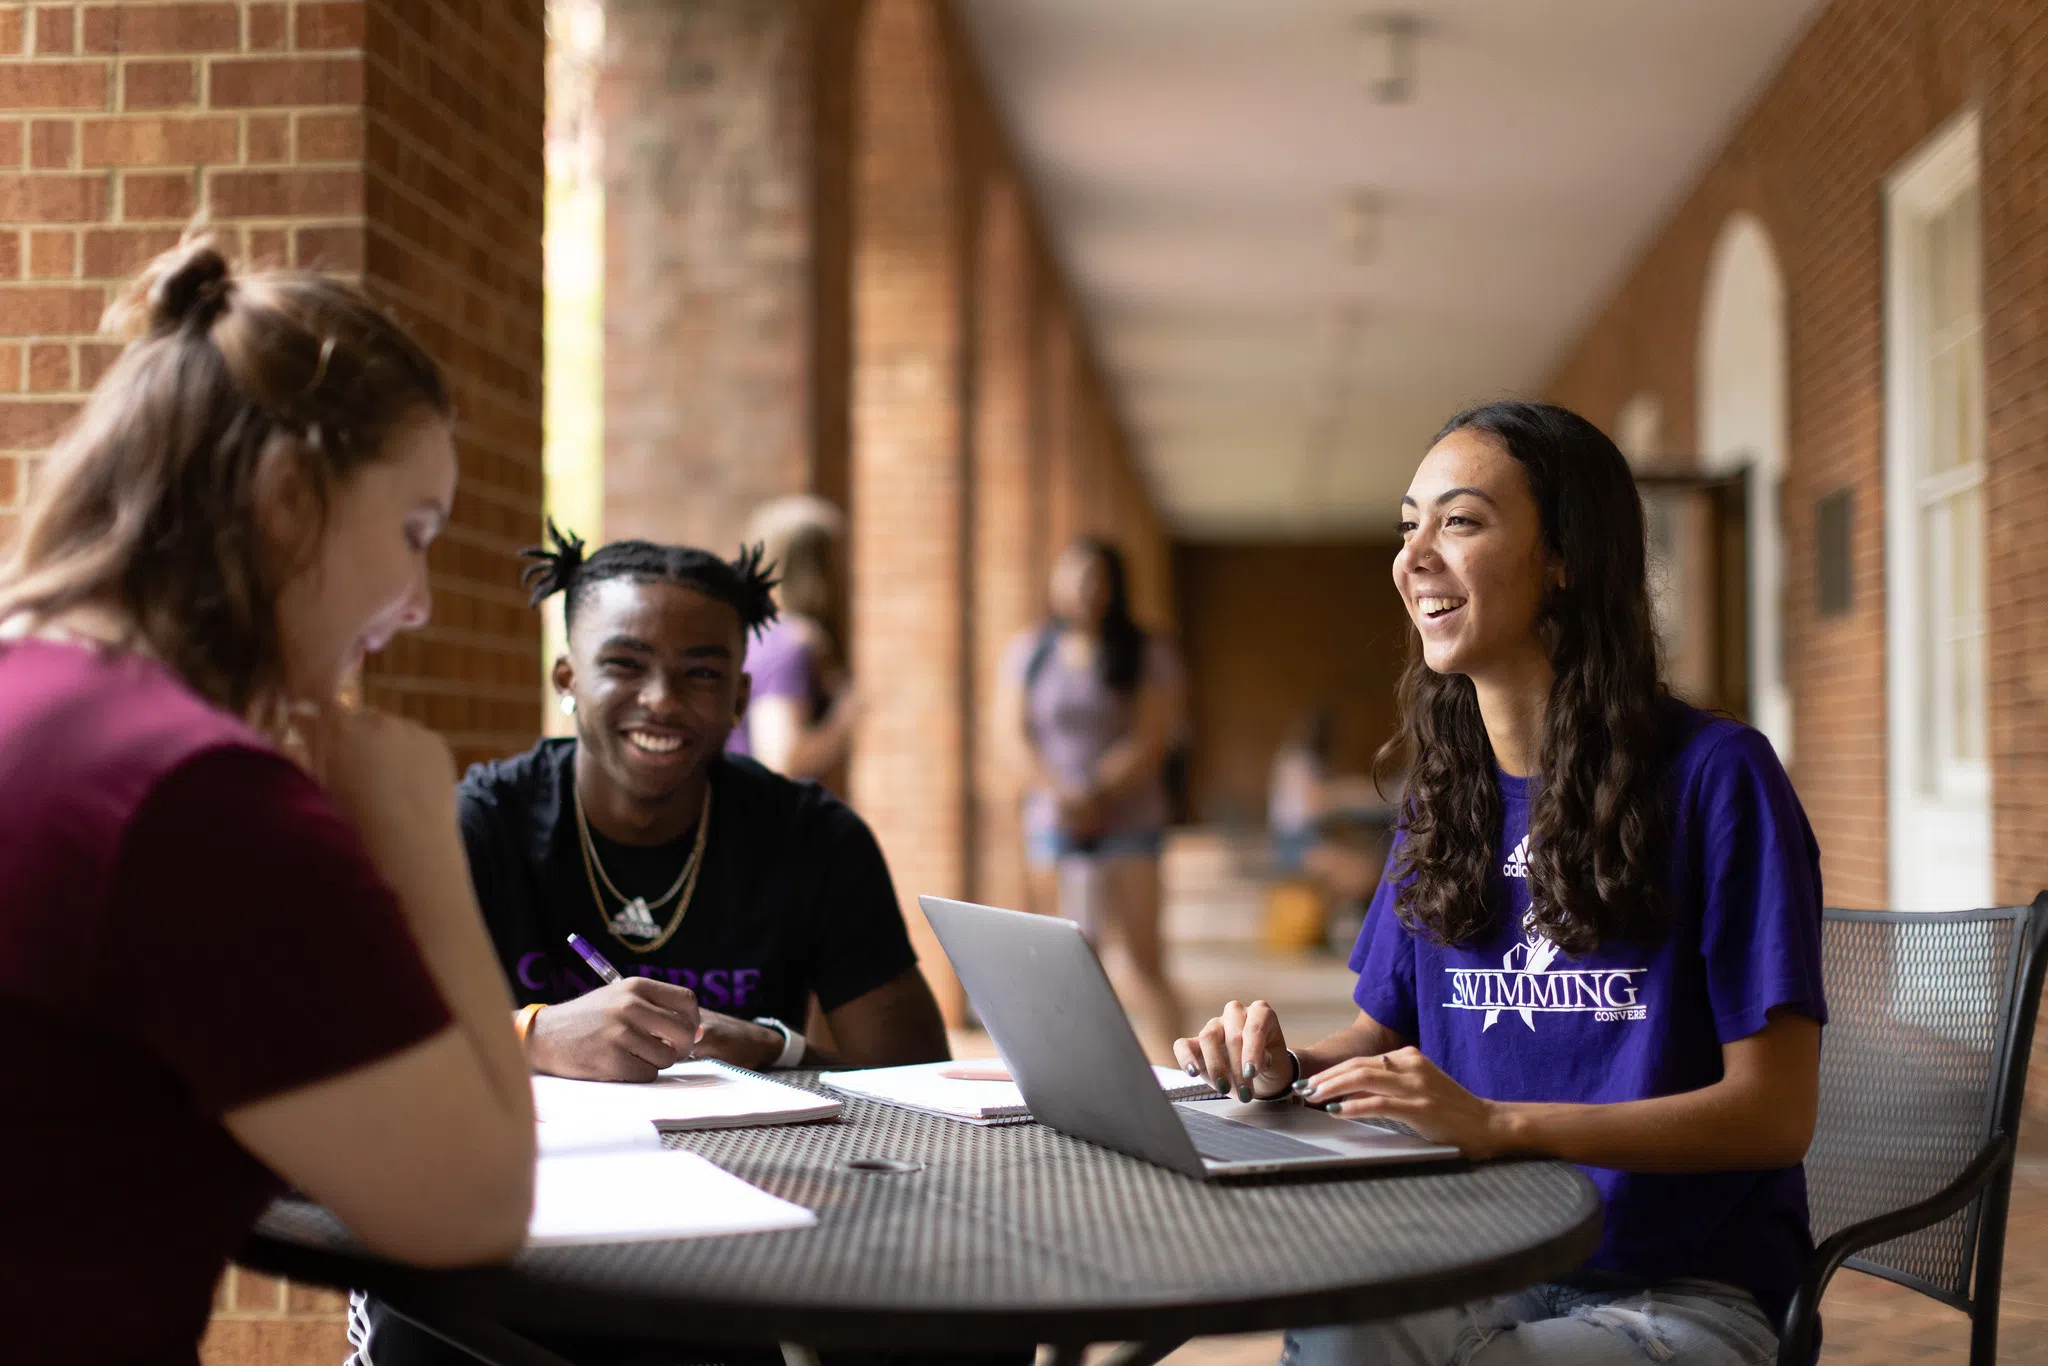 A female student with a computer sits at an outdoor table with another female student and a male student.